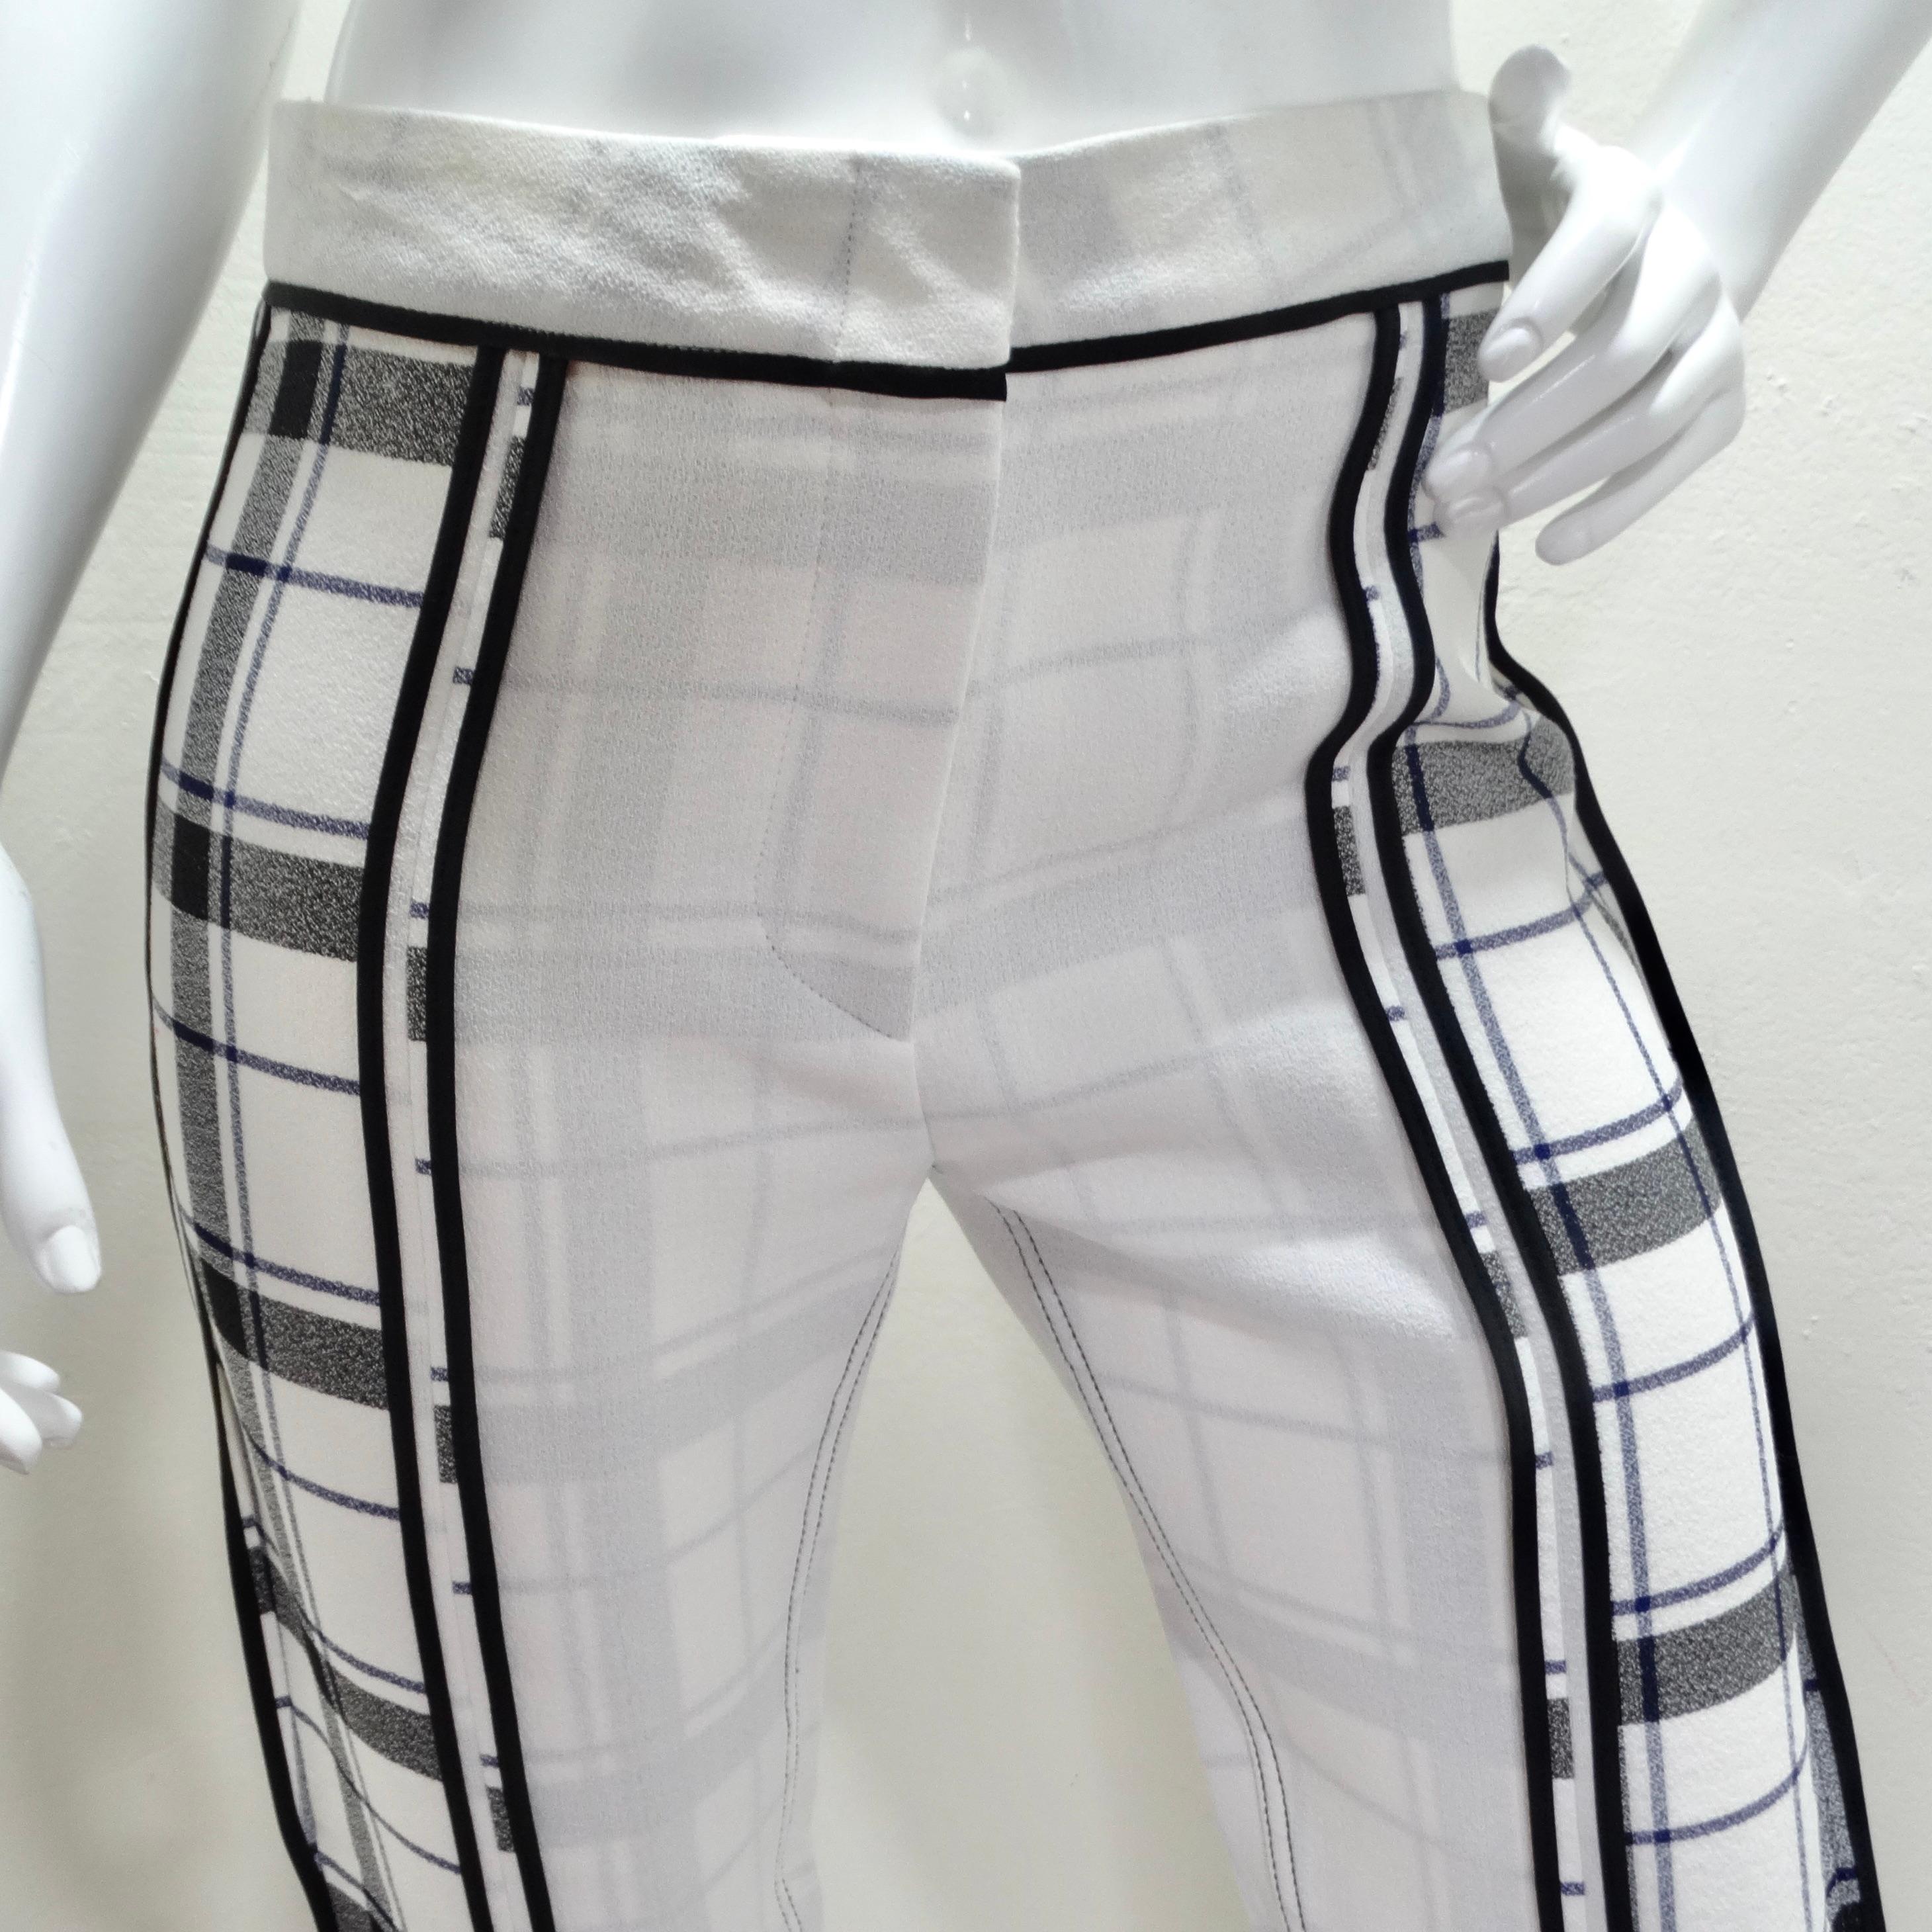 Introducing the Acne Studios Plaid Trousers – a fusion of modern sophistication and timeless style. These women's semi-cropped white trousers are designed to elevate your wardrobe with their unique blend of black and white plaid panels and black